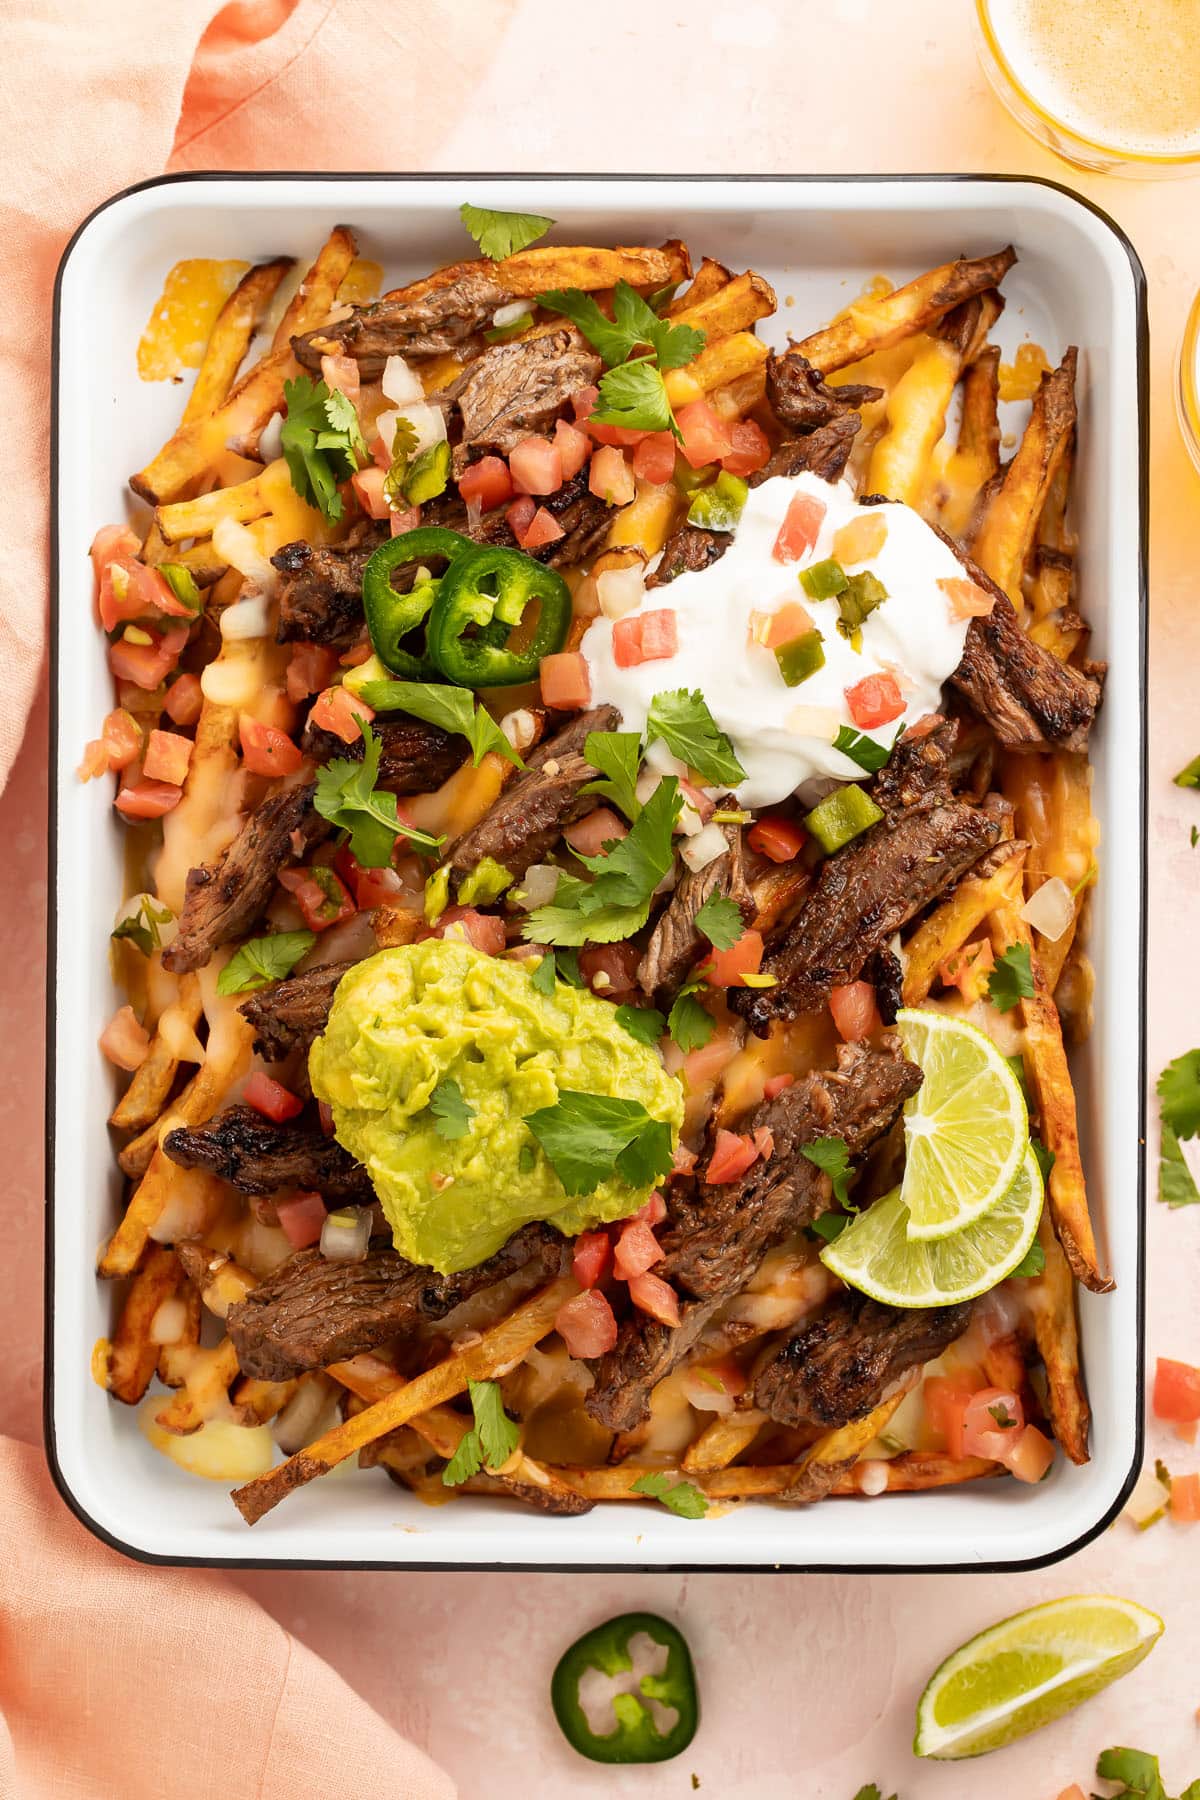 A sheet pan of loaded carne asada fries topped with guacamole, sour cream, cheese, and green onions.